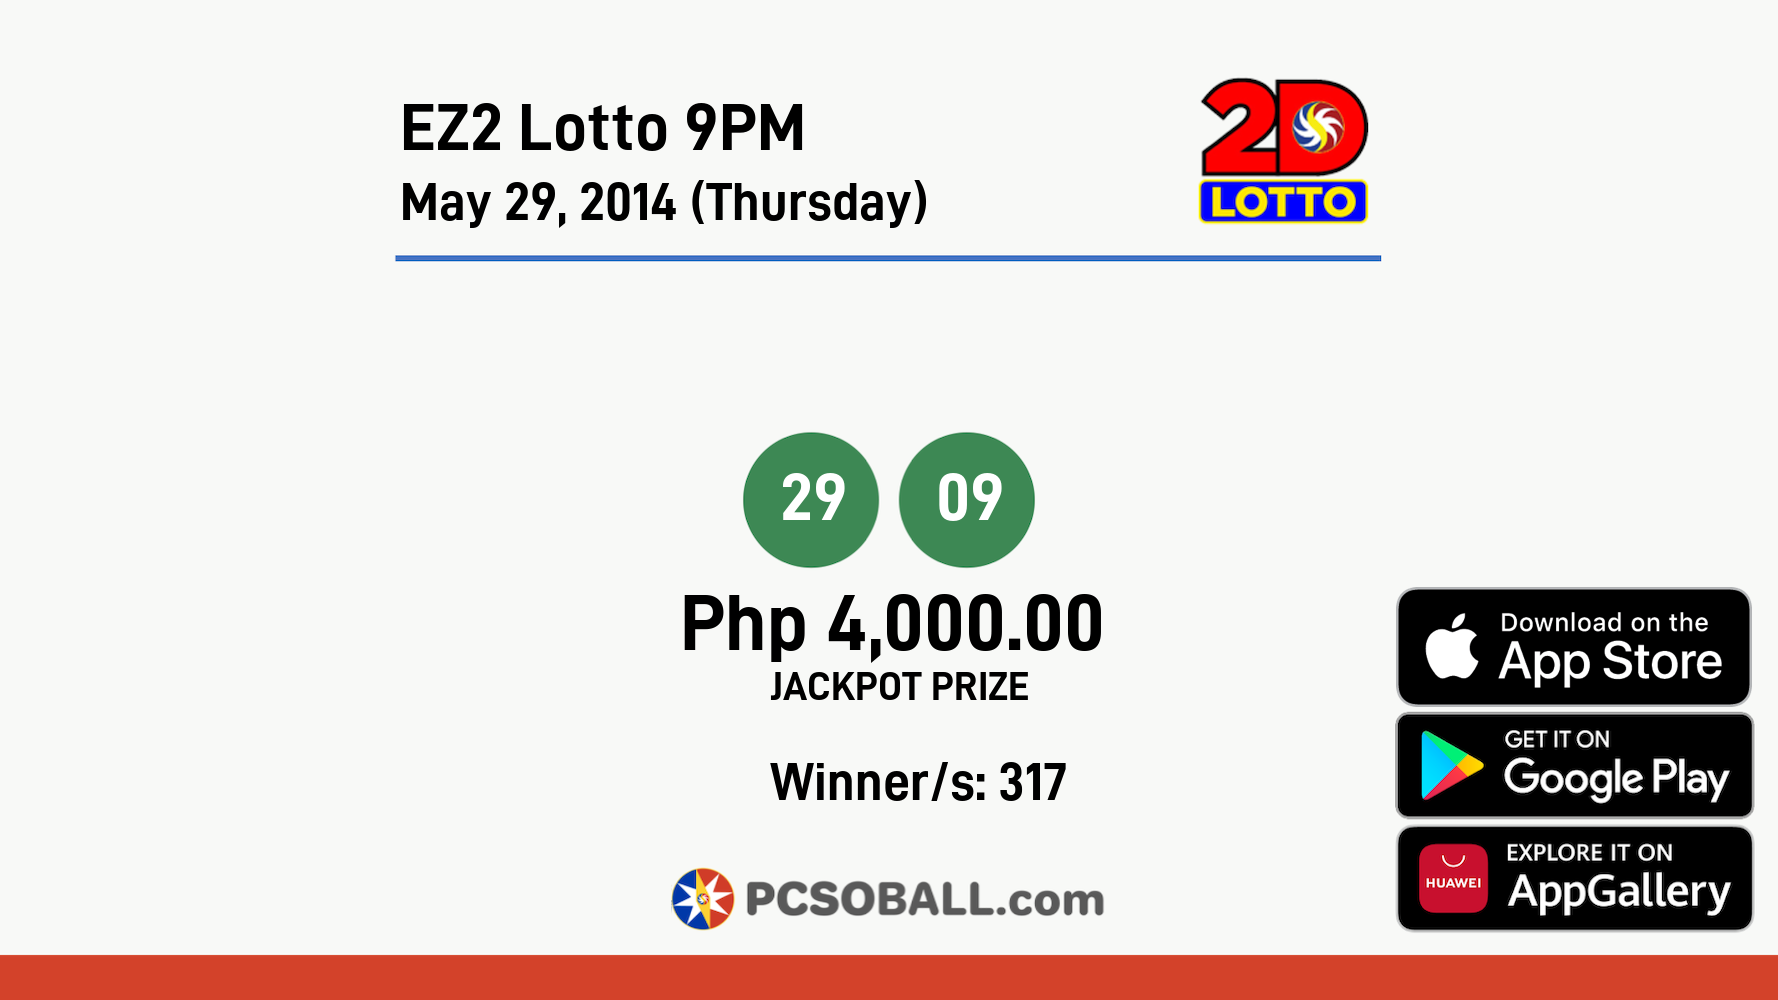 EZ2 Lotto 9PM May 29, 2014 (Thursday) Result